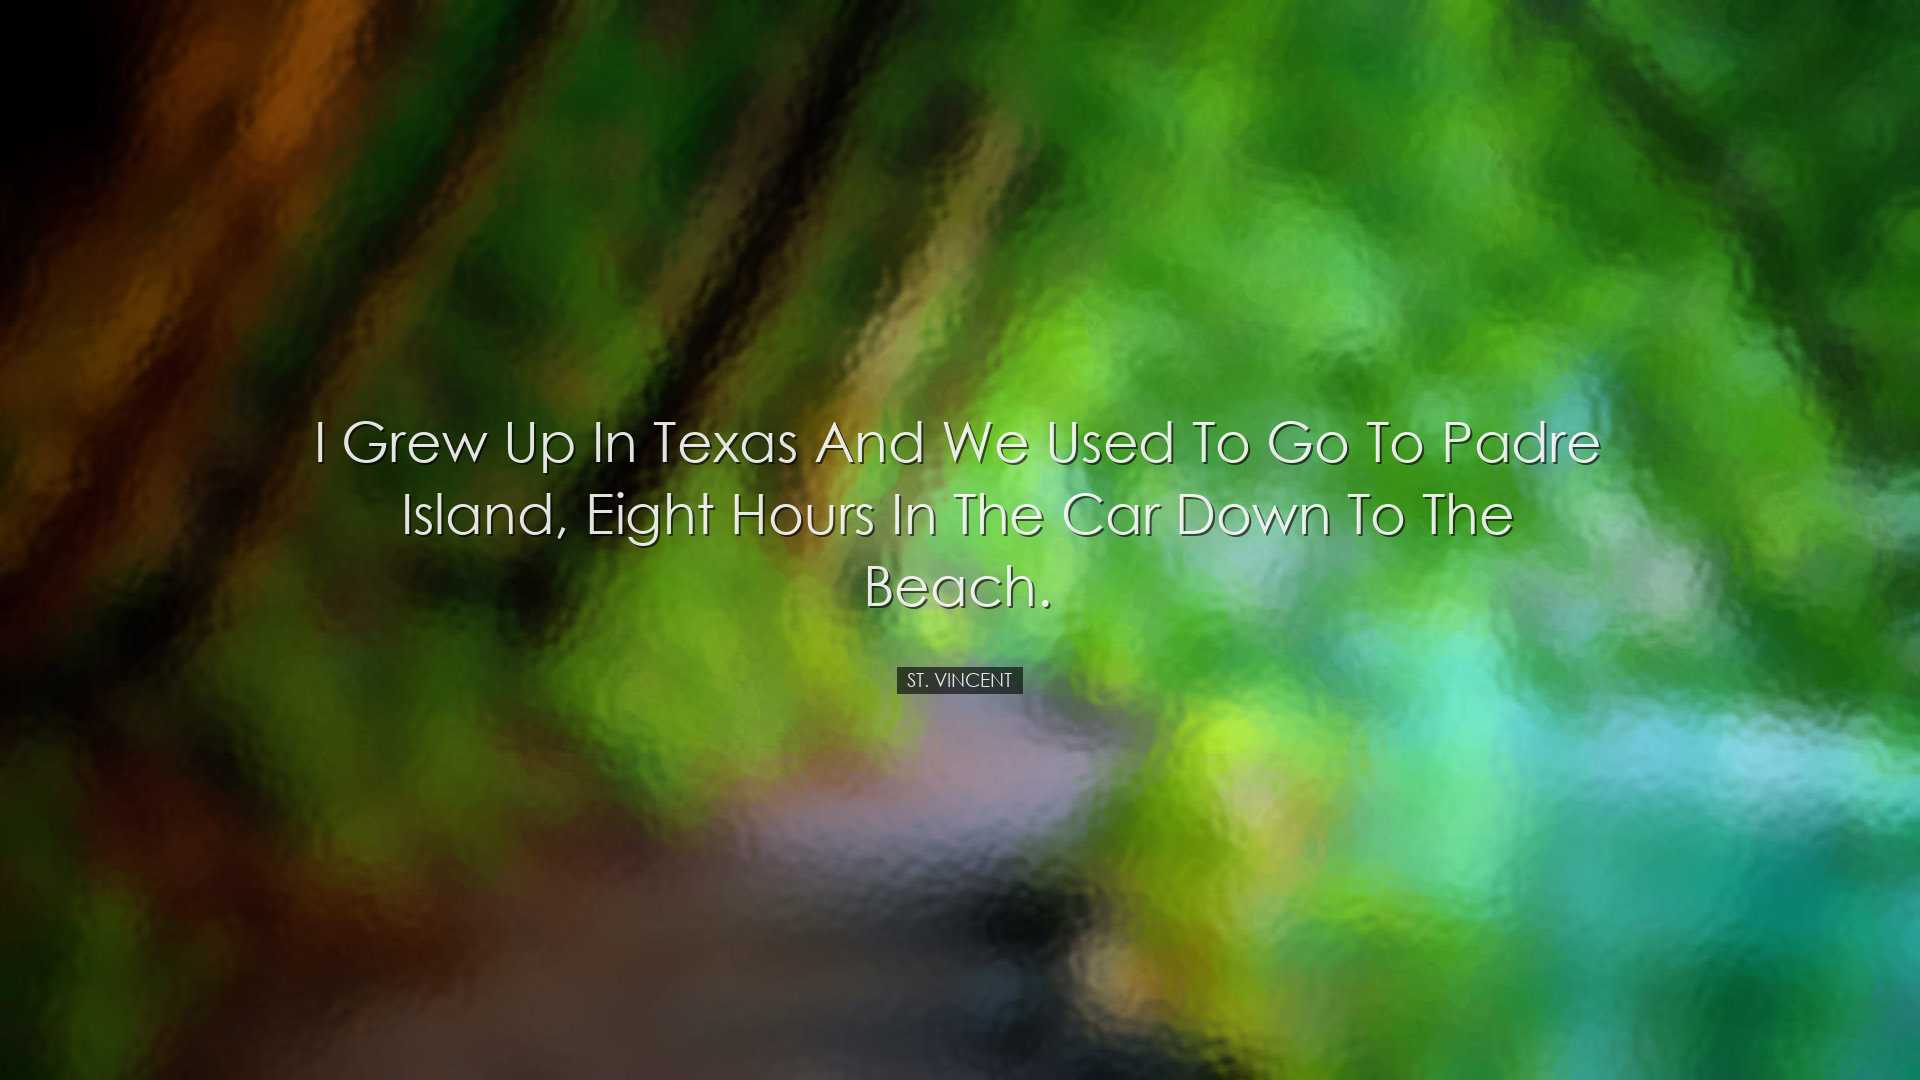 I grew up in Texas and we used to go to Padre Island, eight hours